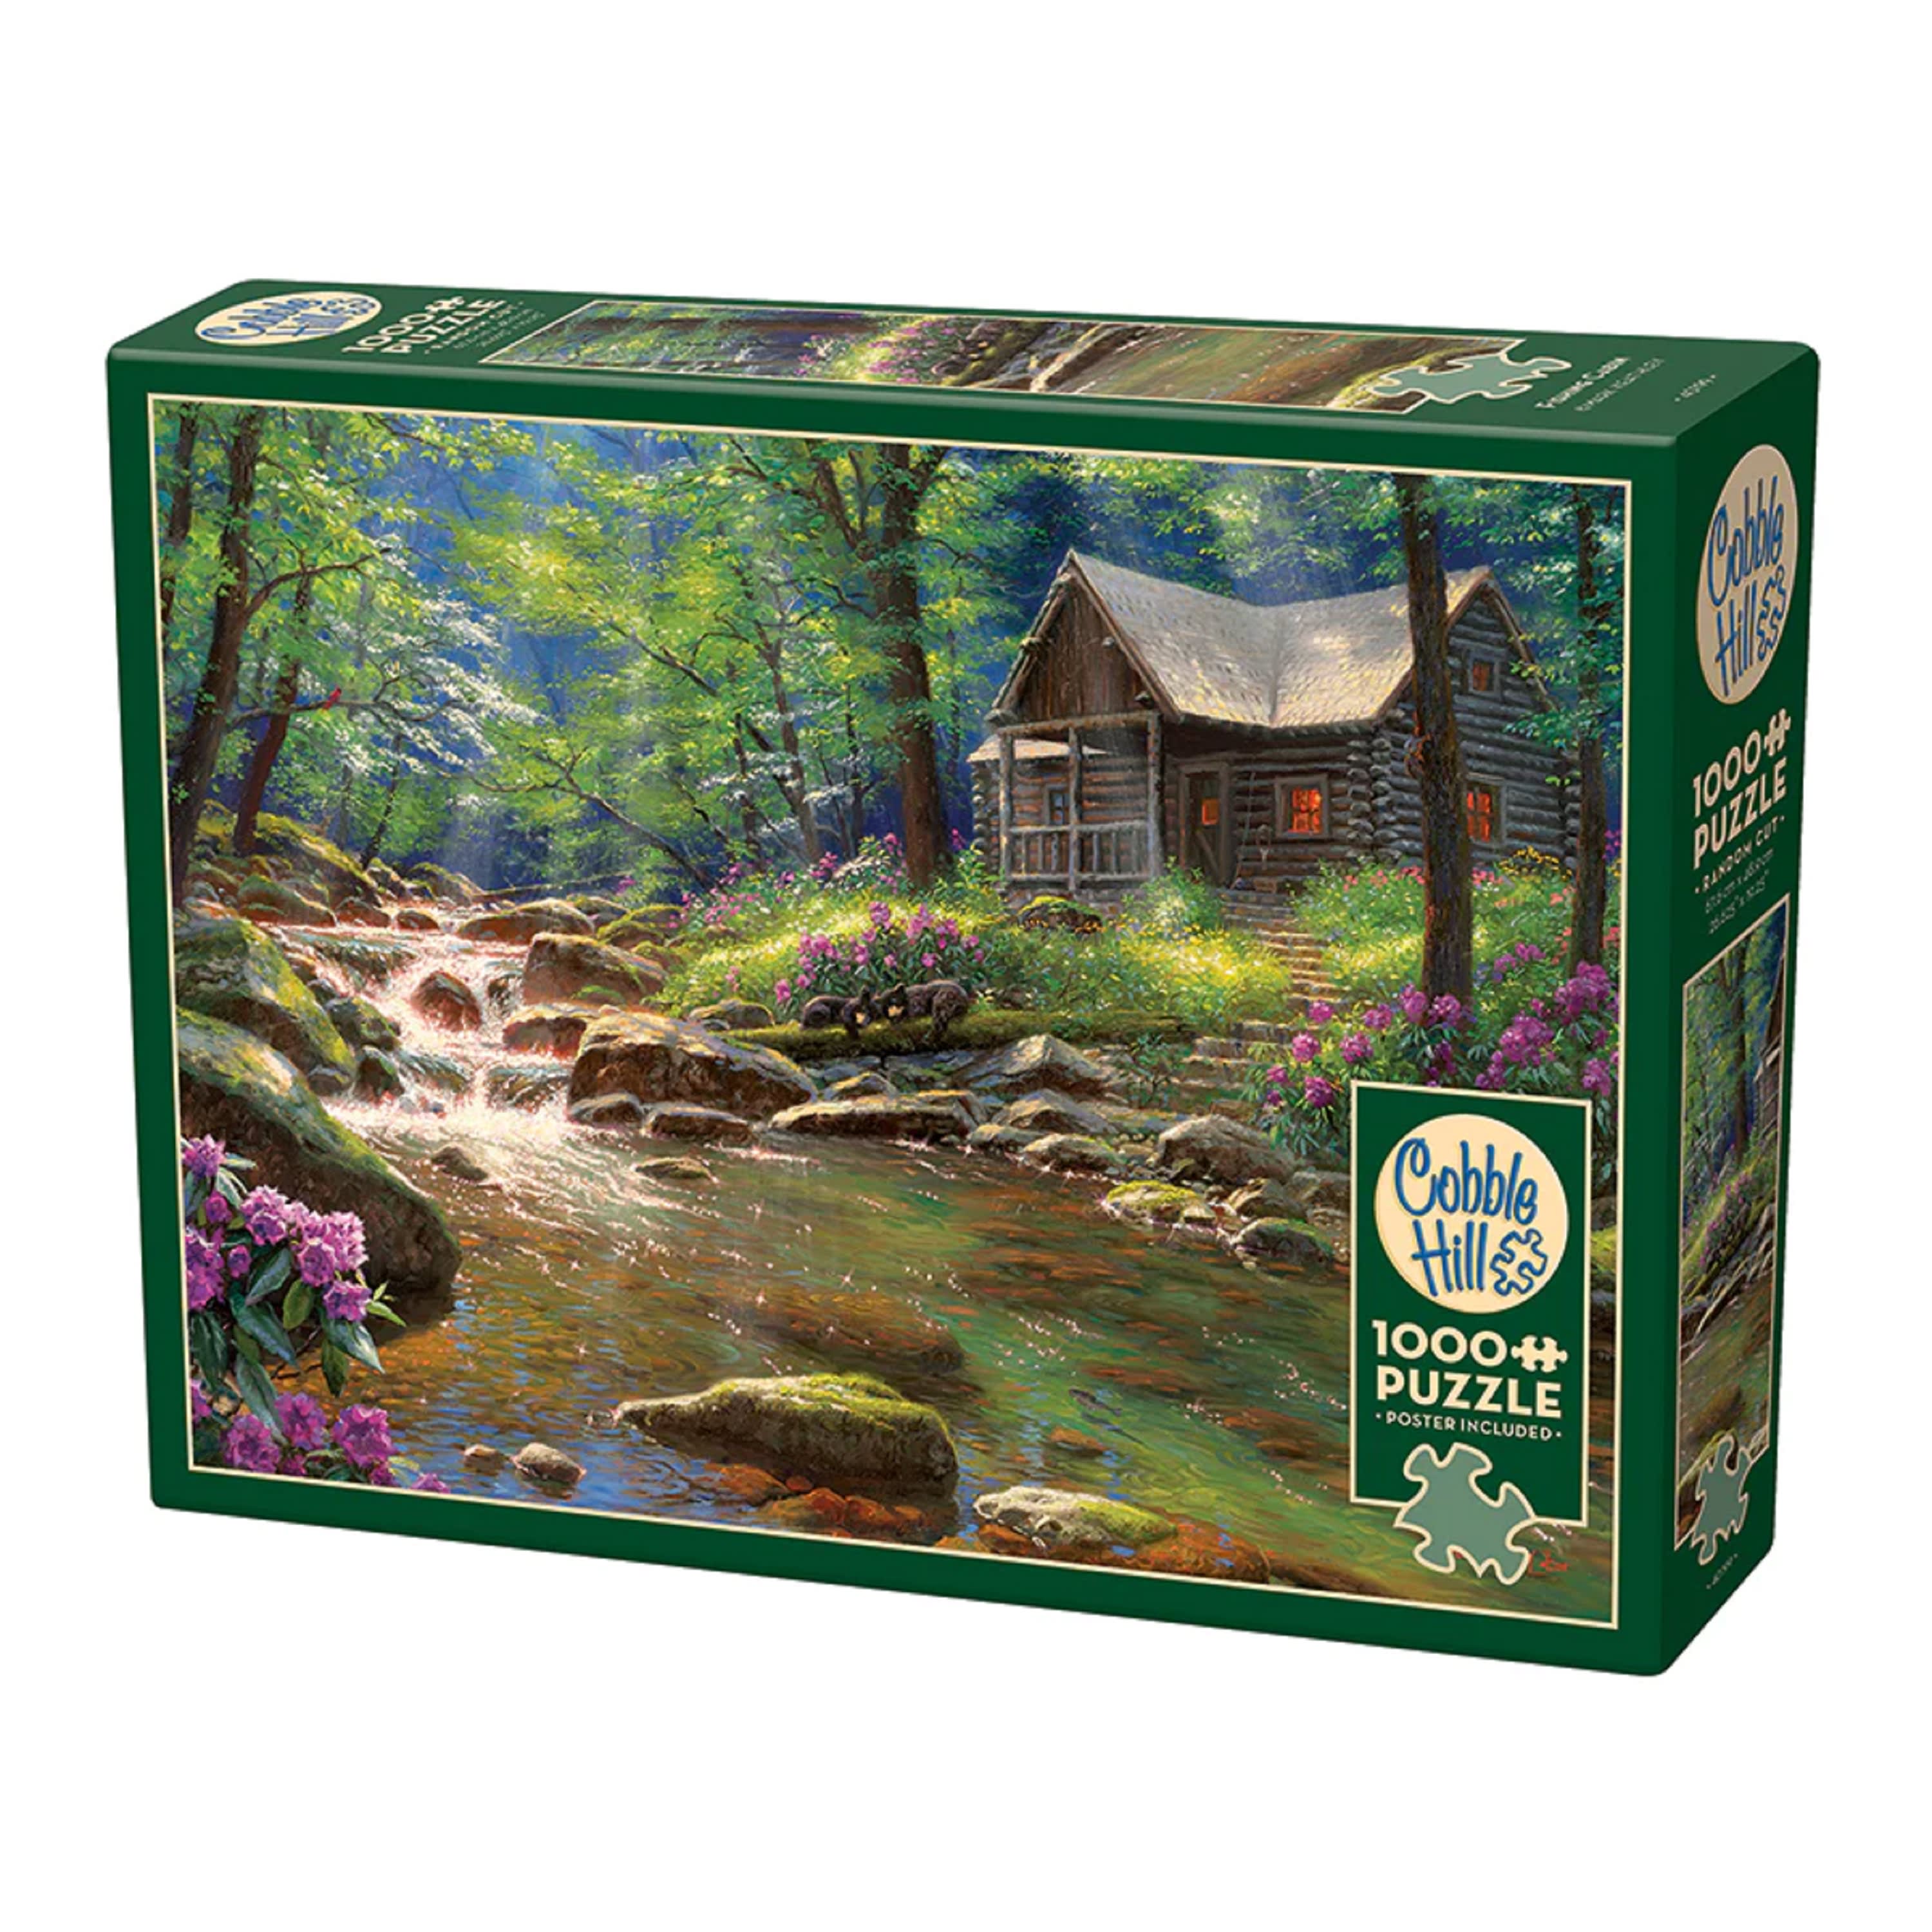 Cobble Hill Fishing Cabin Puzzle - 1000 Pieces